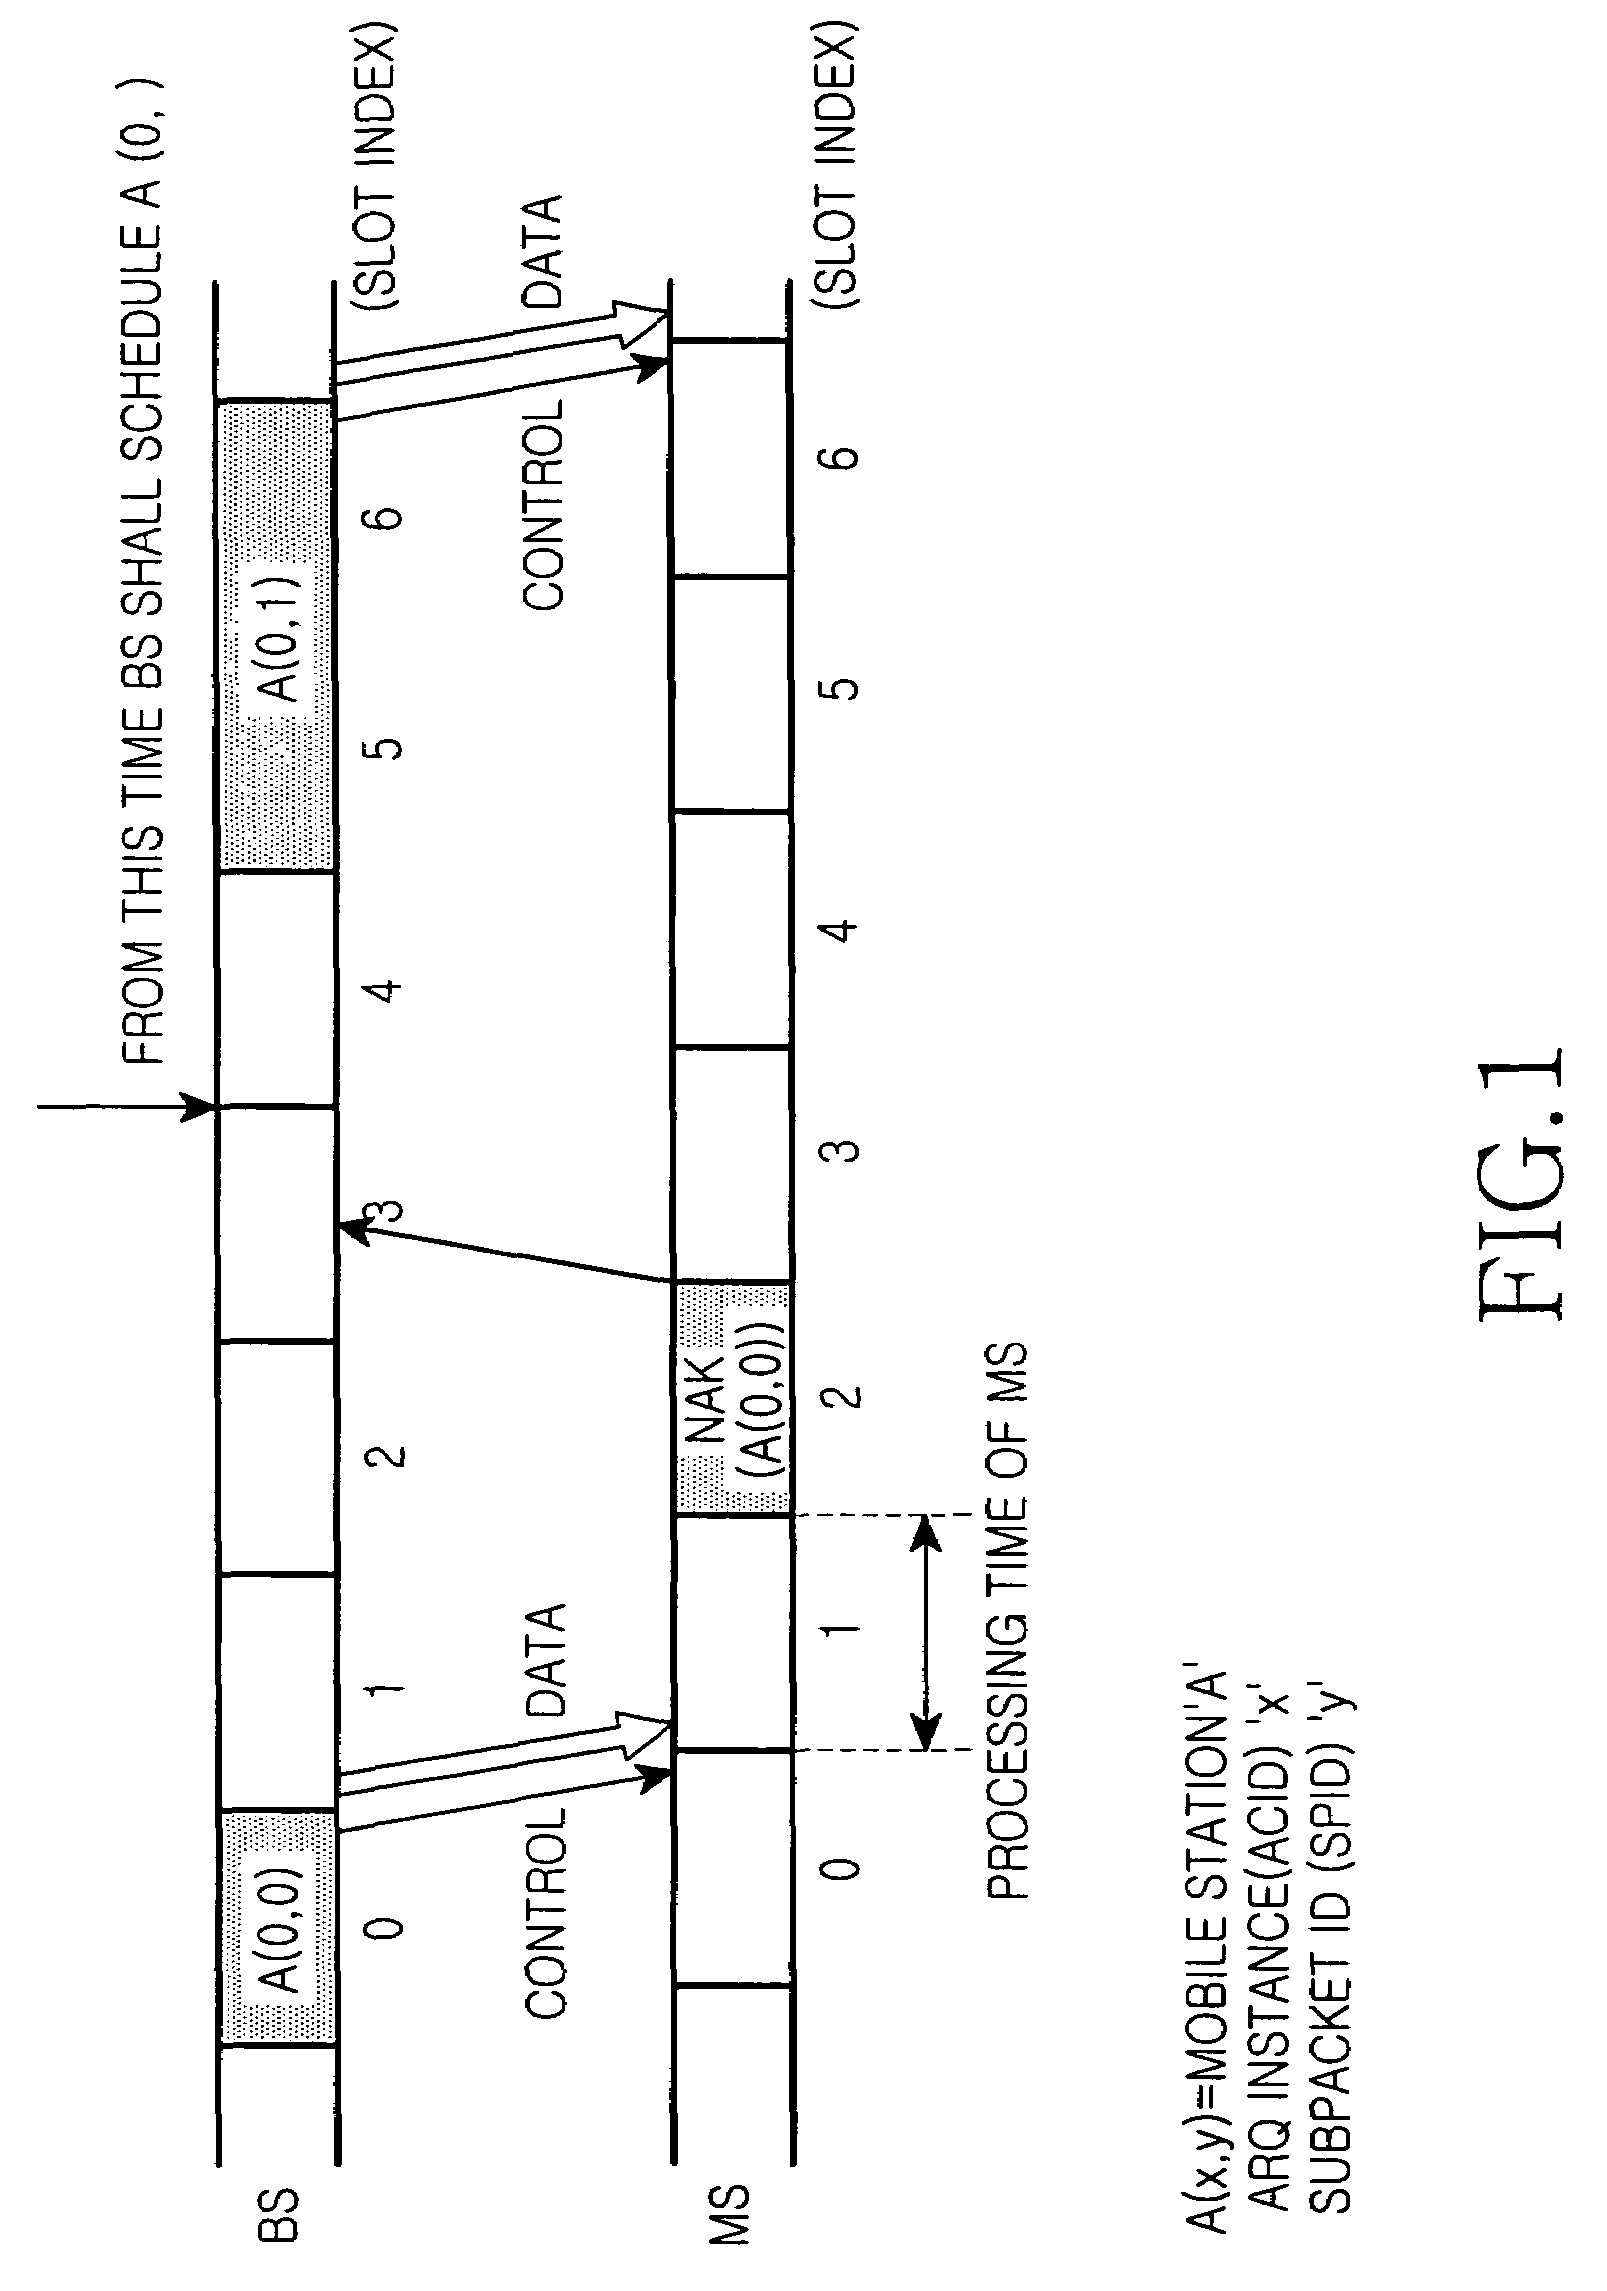 Method for controlling turbo decoding time in a high-speed packet data communication system